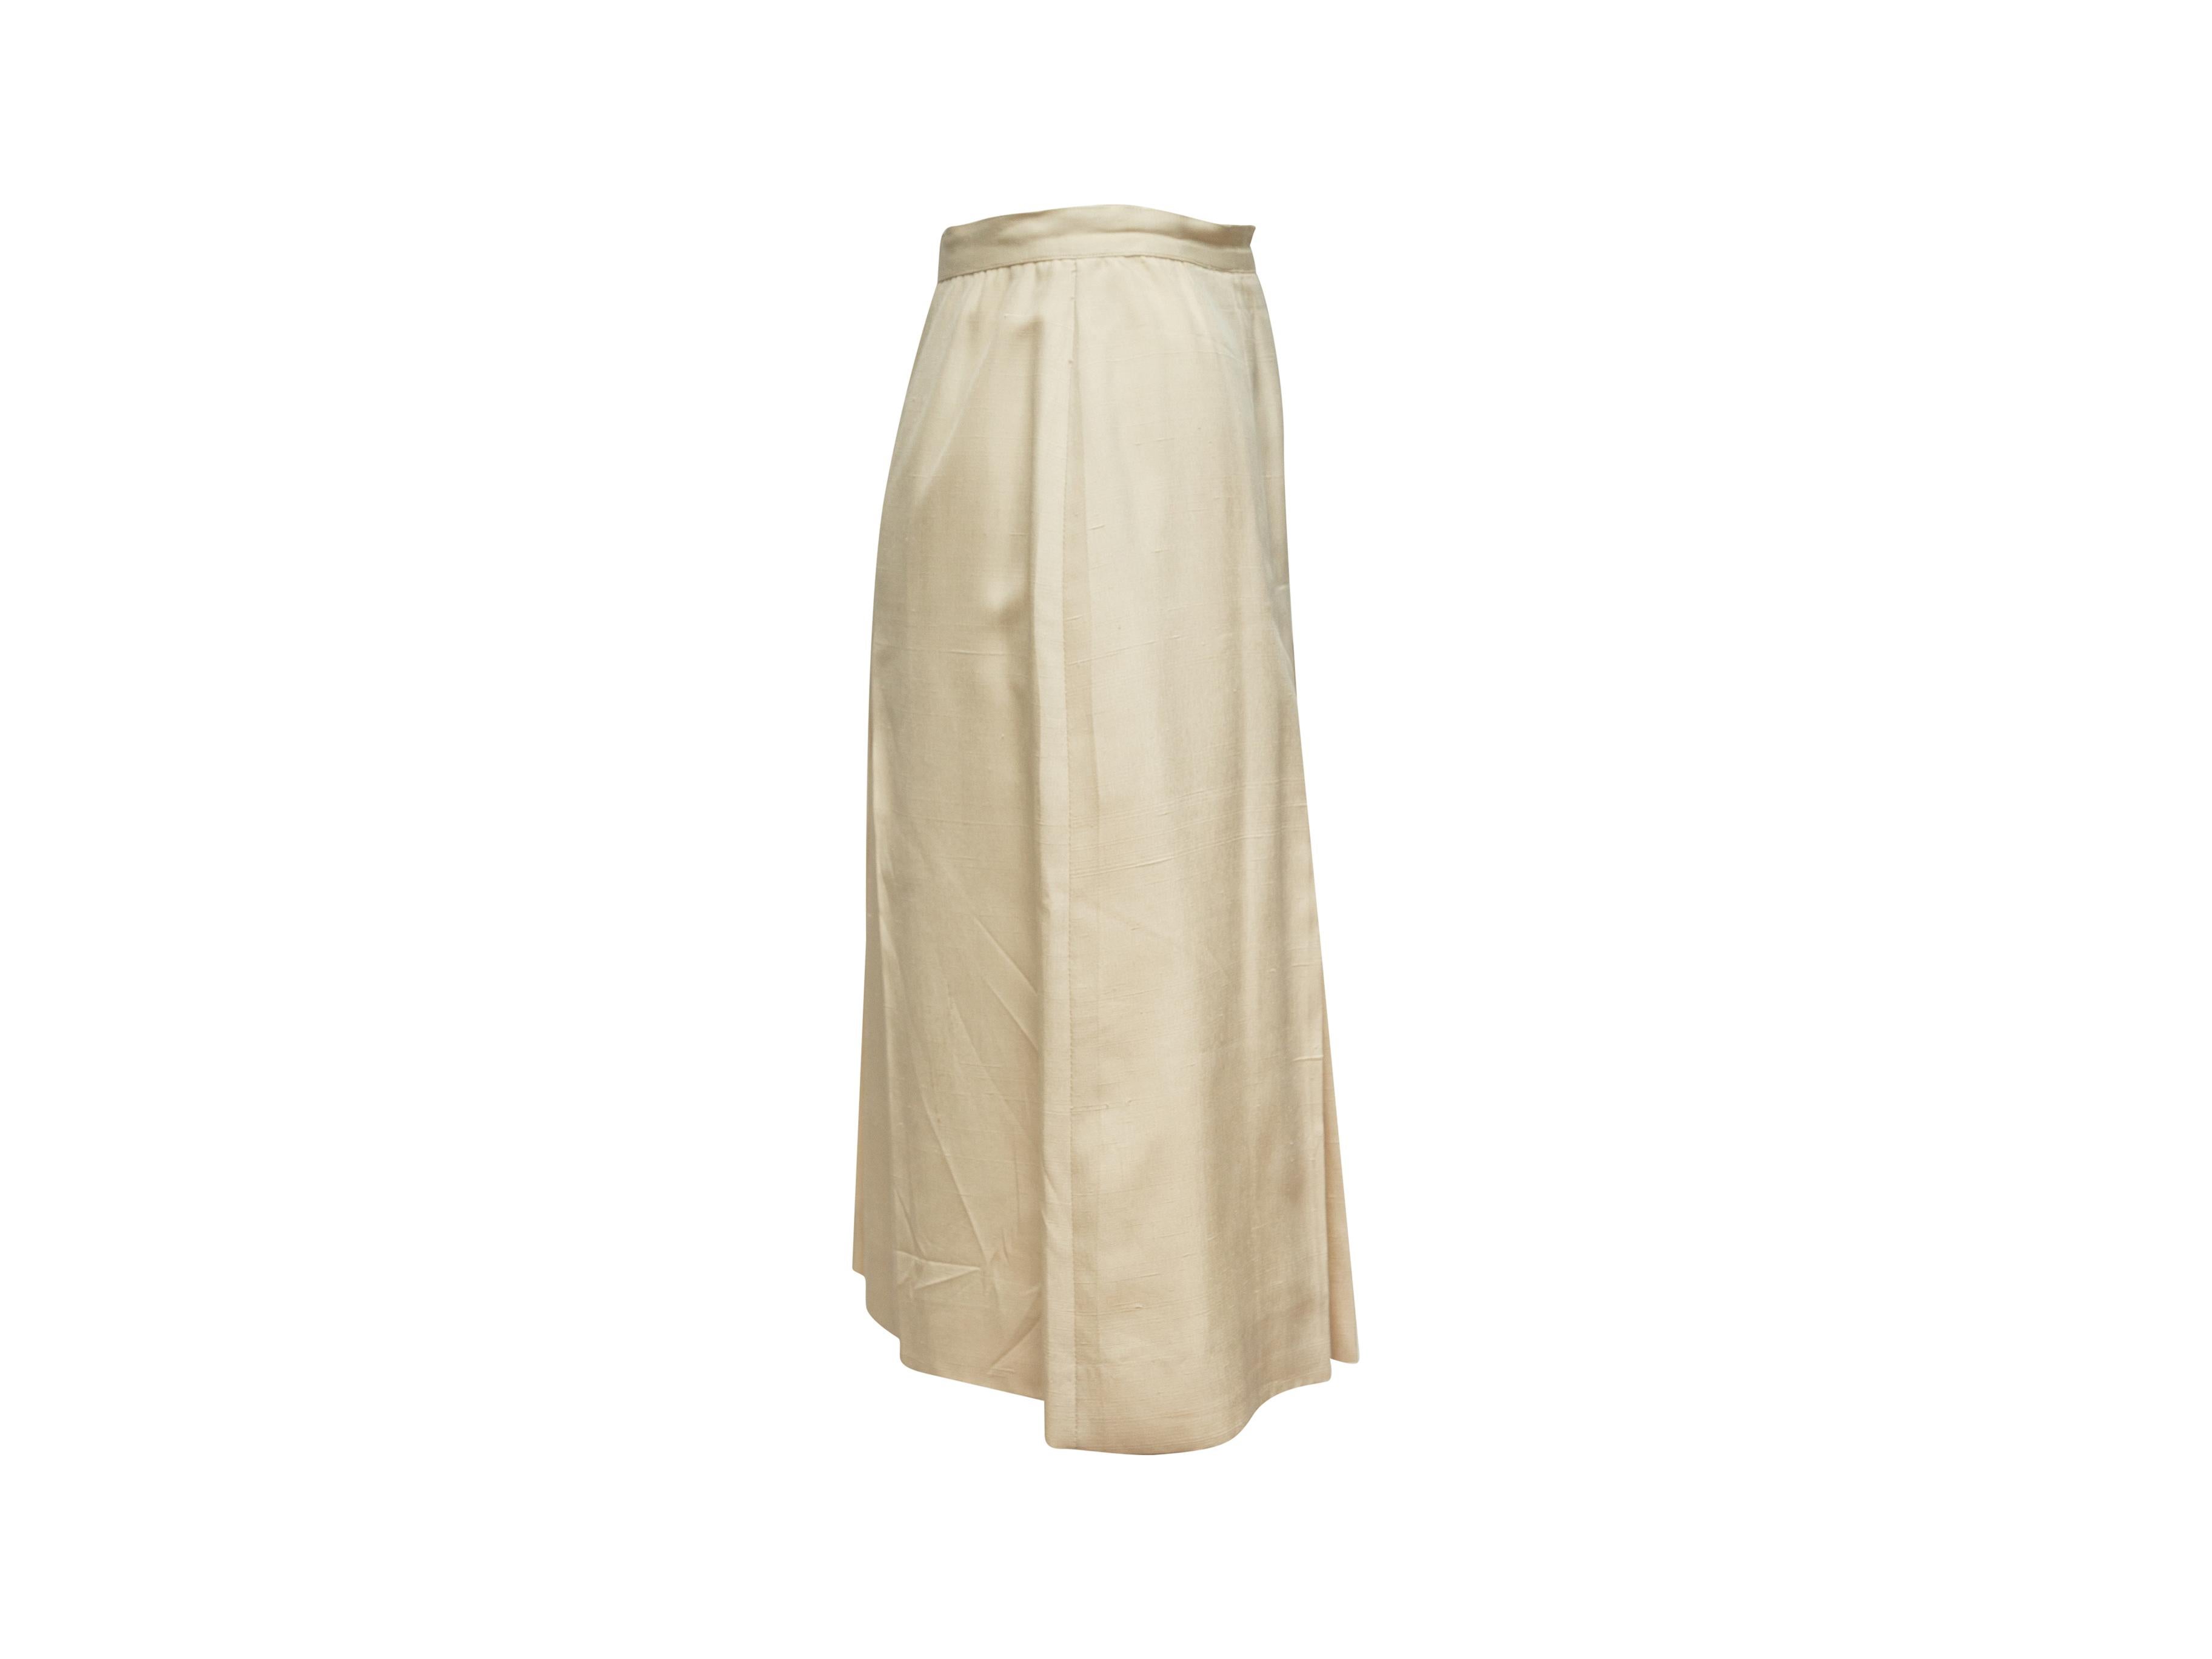 Product details: Vintage cream pleated skirt by Chanel. Concealed closures at side. Designer size 38. 29